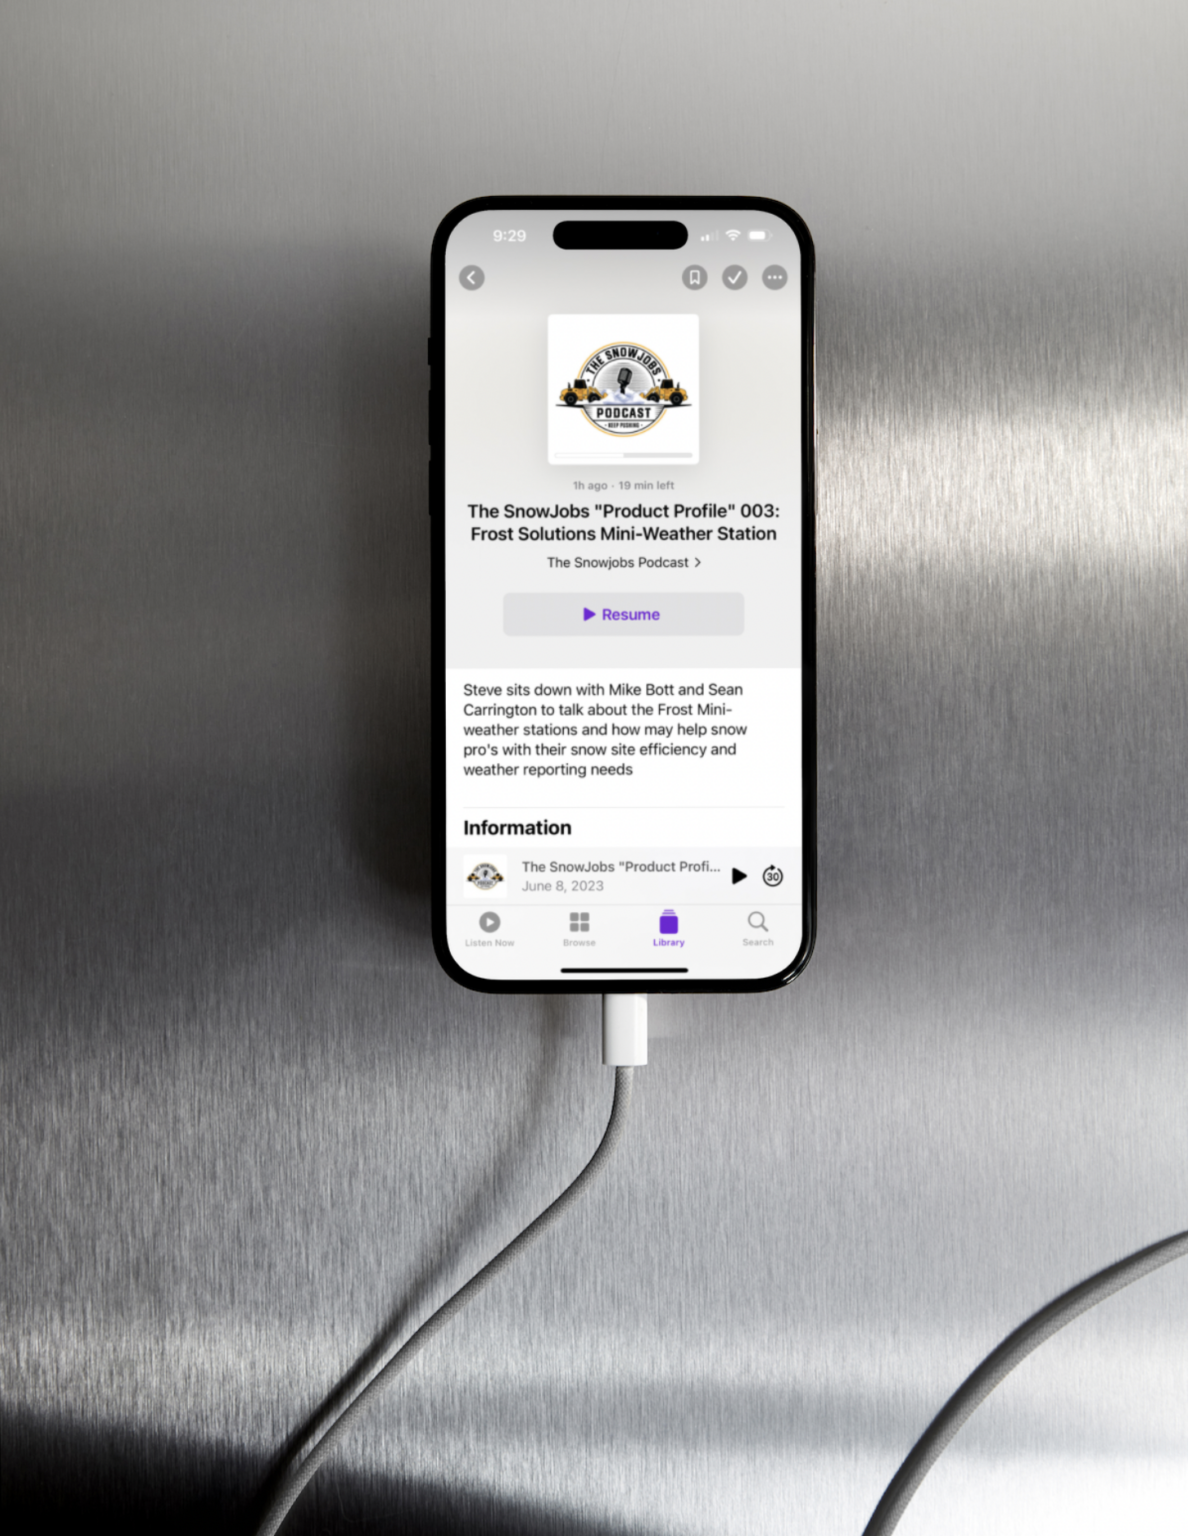 Picture of a phone showing the Snowjobs podcast episode featuring Frost Solutions.